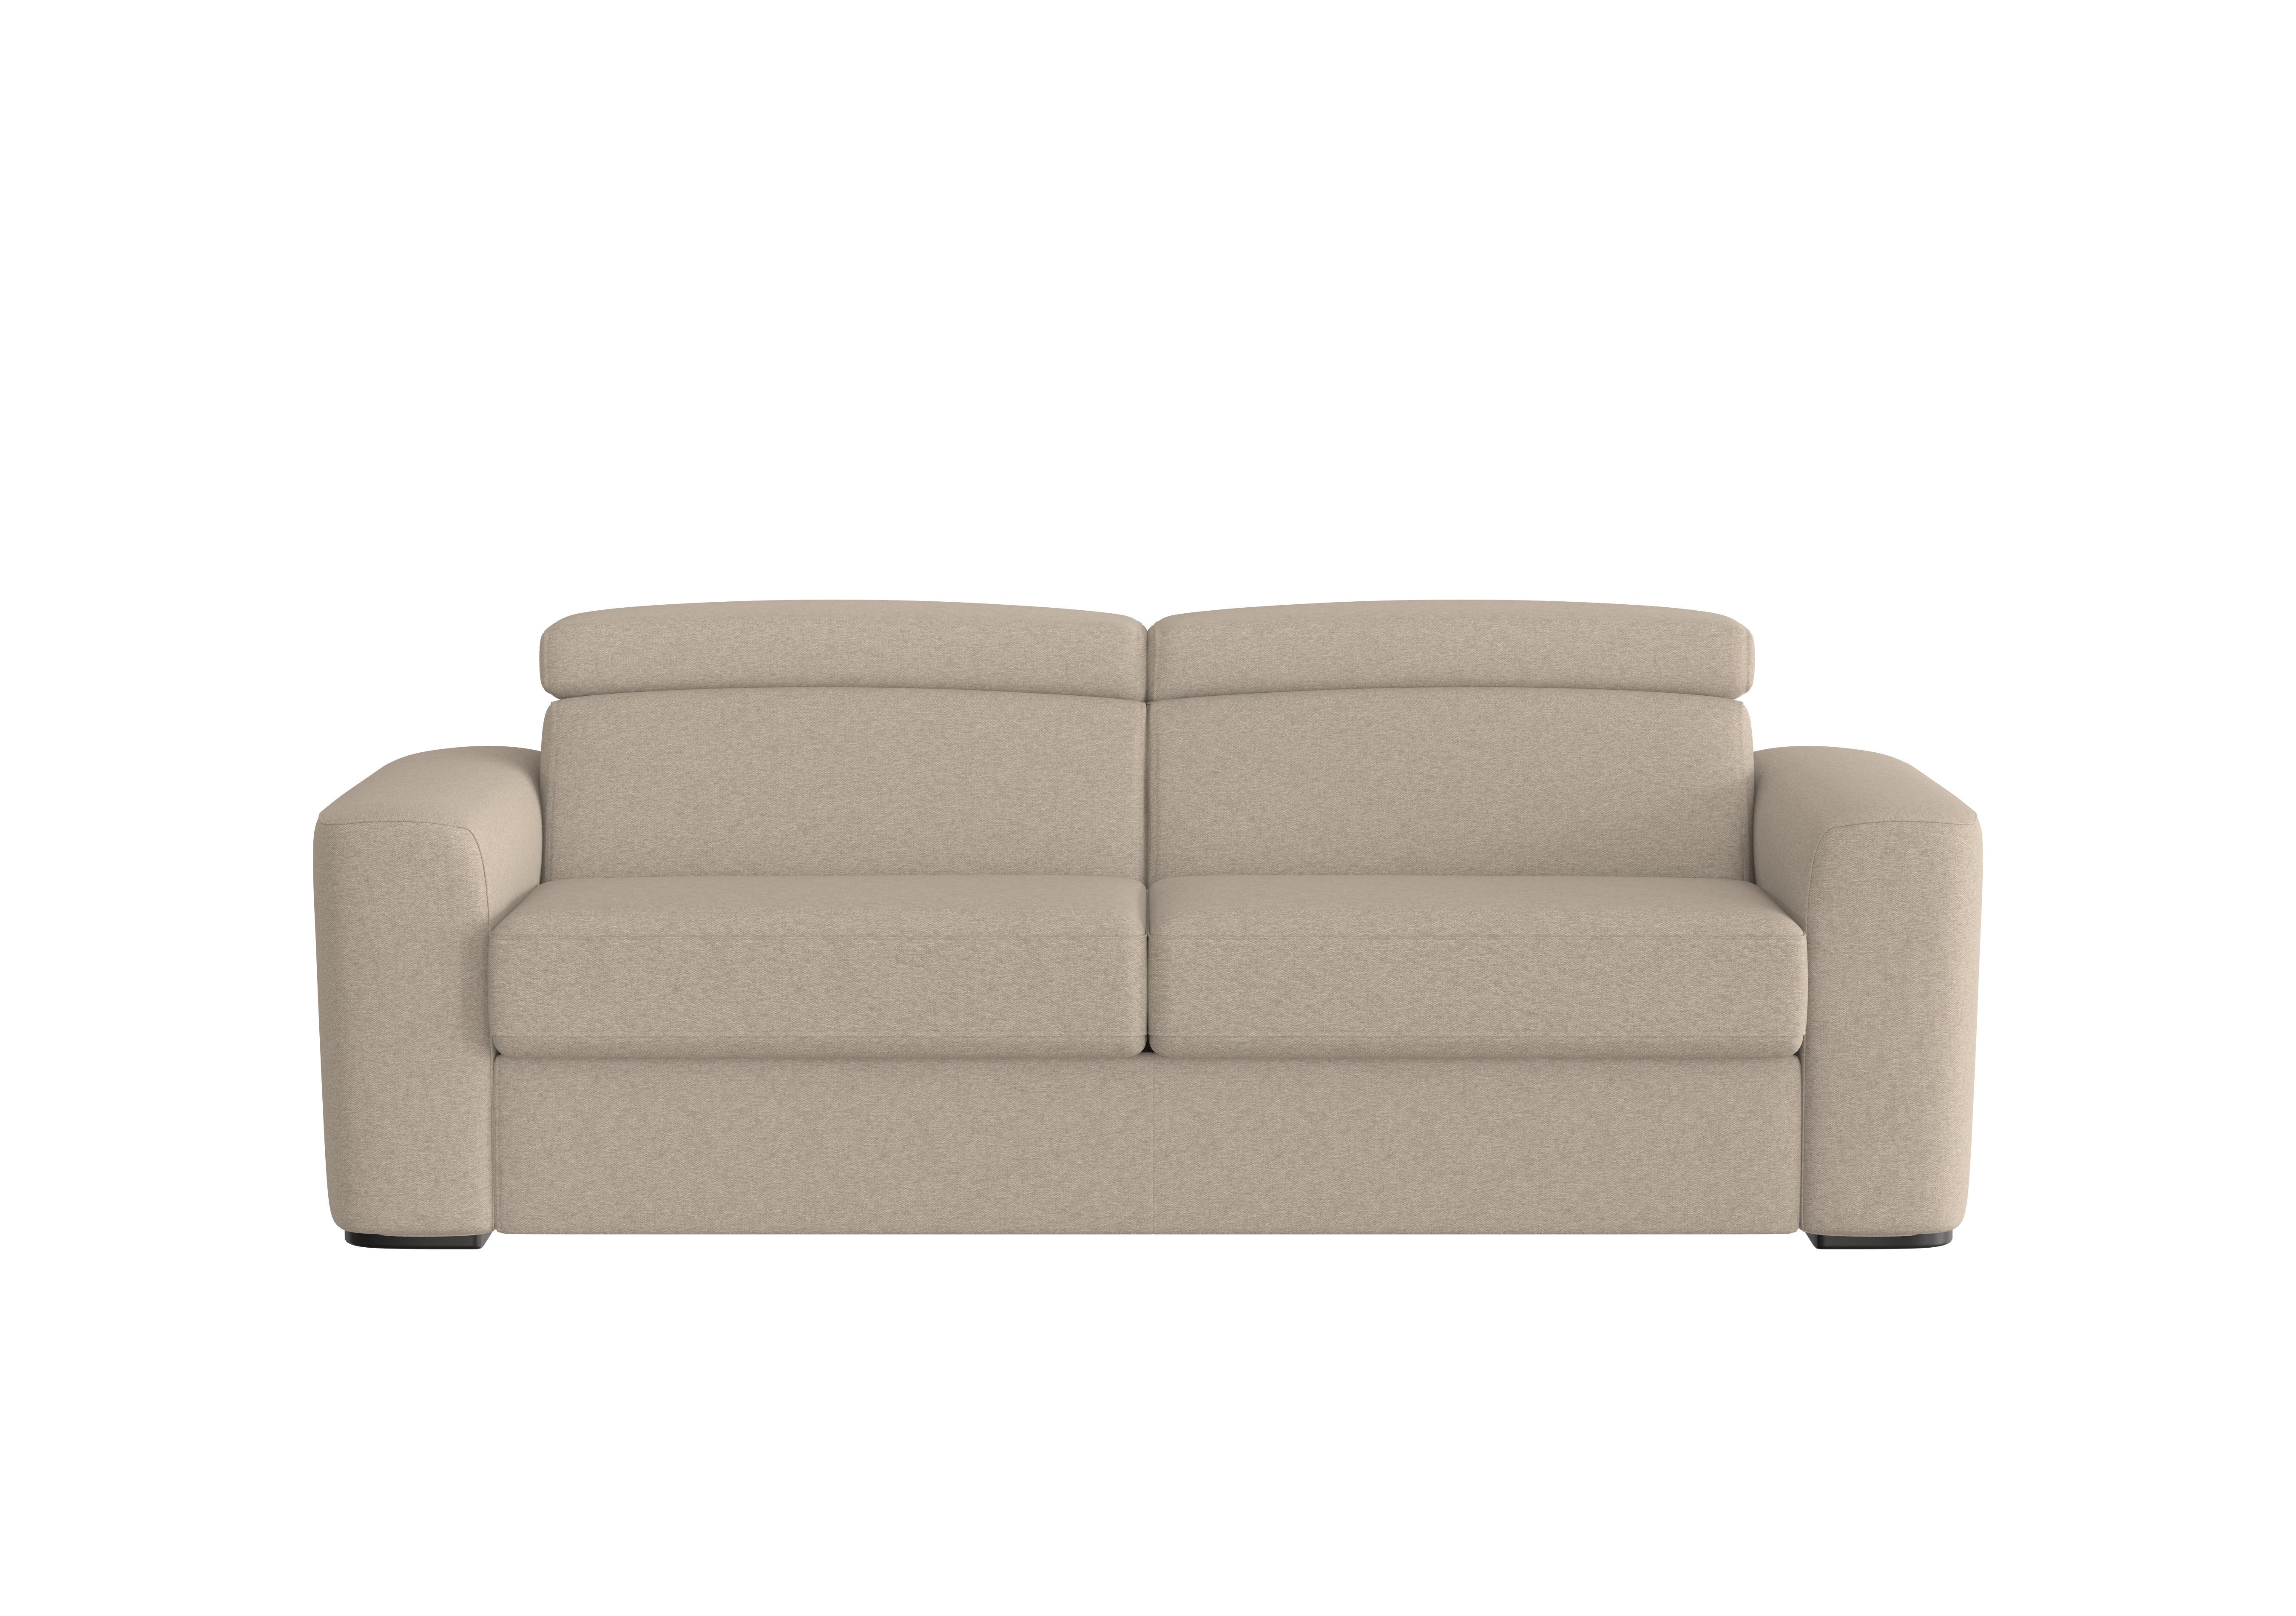 Infinity 3 Seater Fabric Sofa Bed in Fab-Ska-R28 Beige on Furniture Village